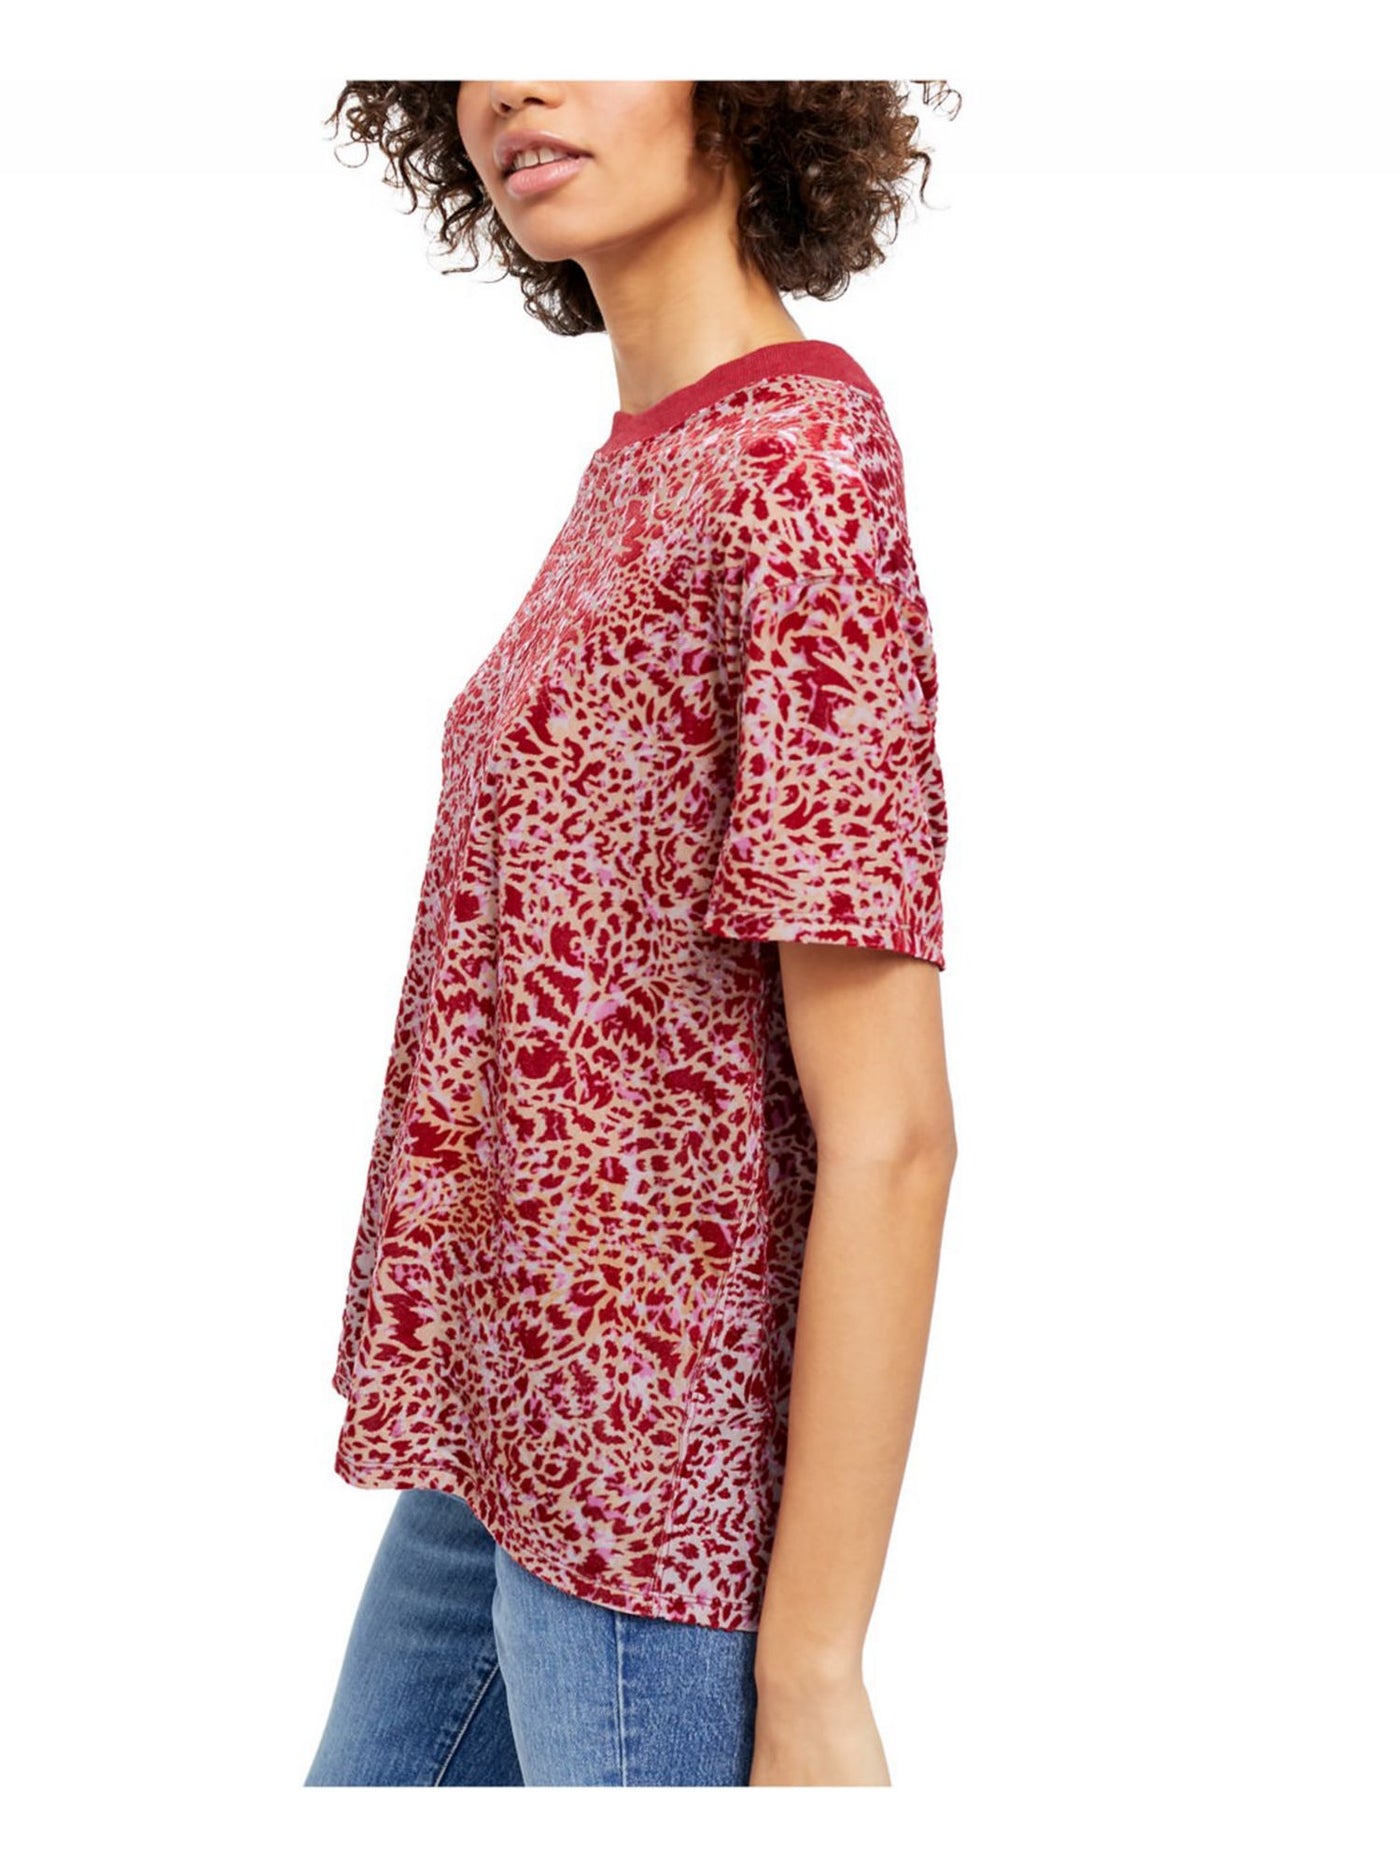 FREE PEOPLE Womens Red Printed Short Sleeve Crew Neck T-Shirt XS